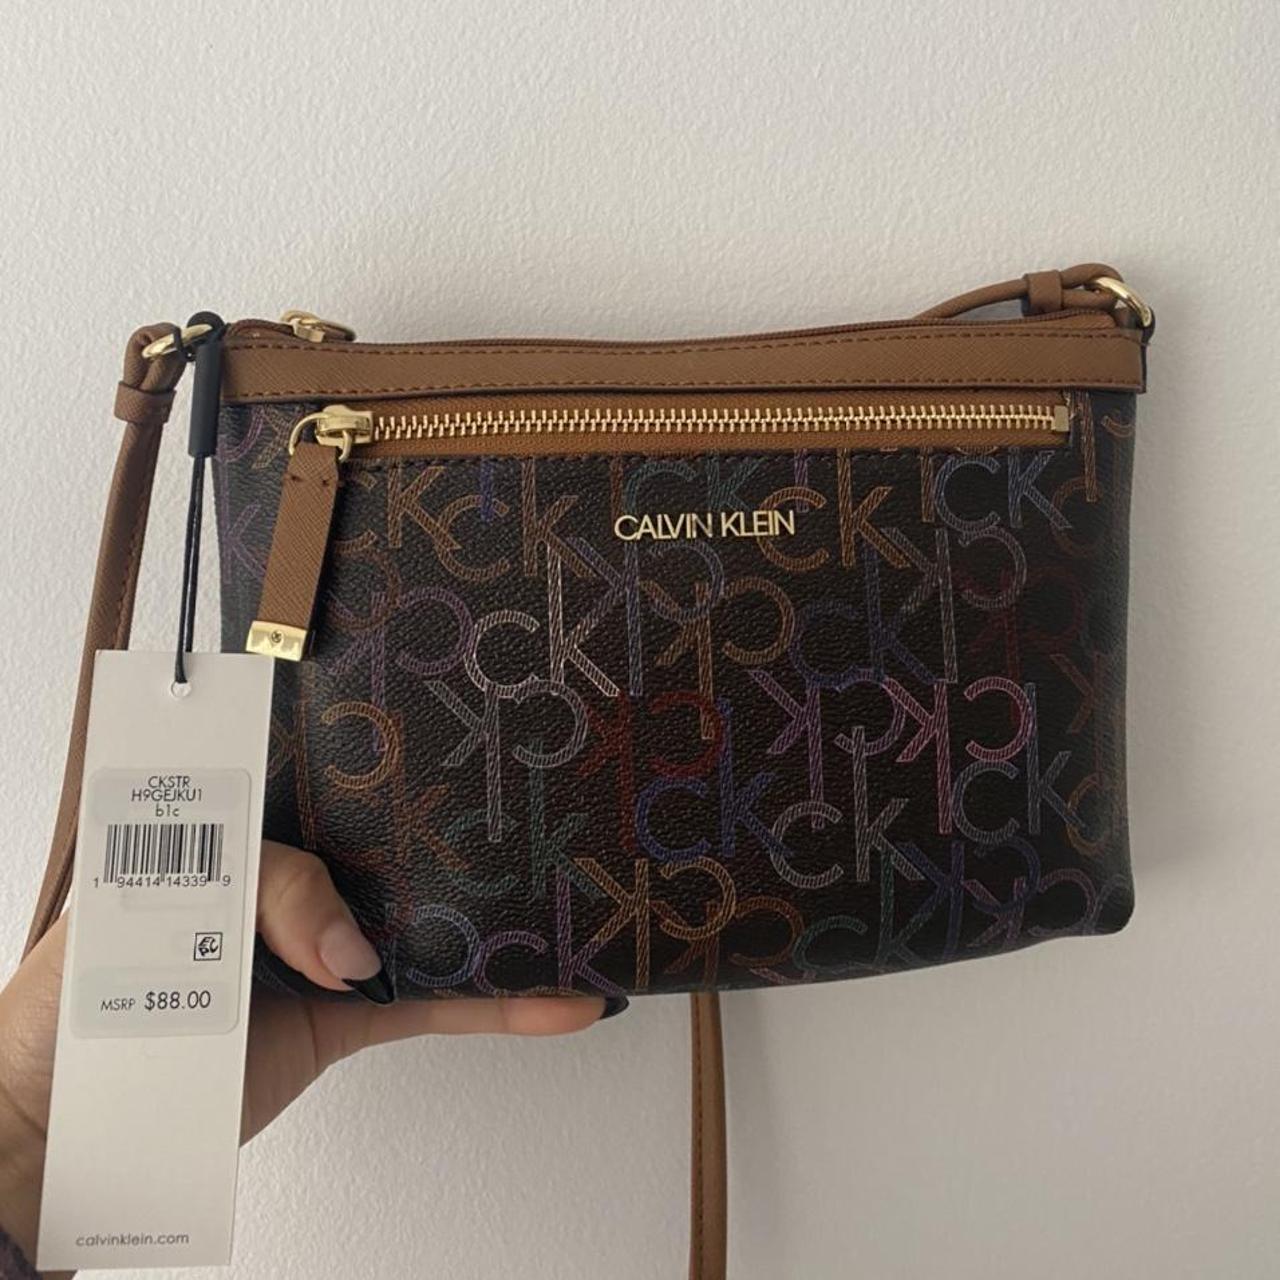 Calvin Klein sling bag with tags